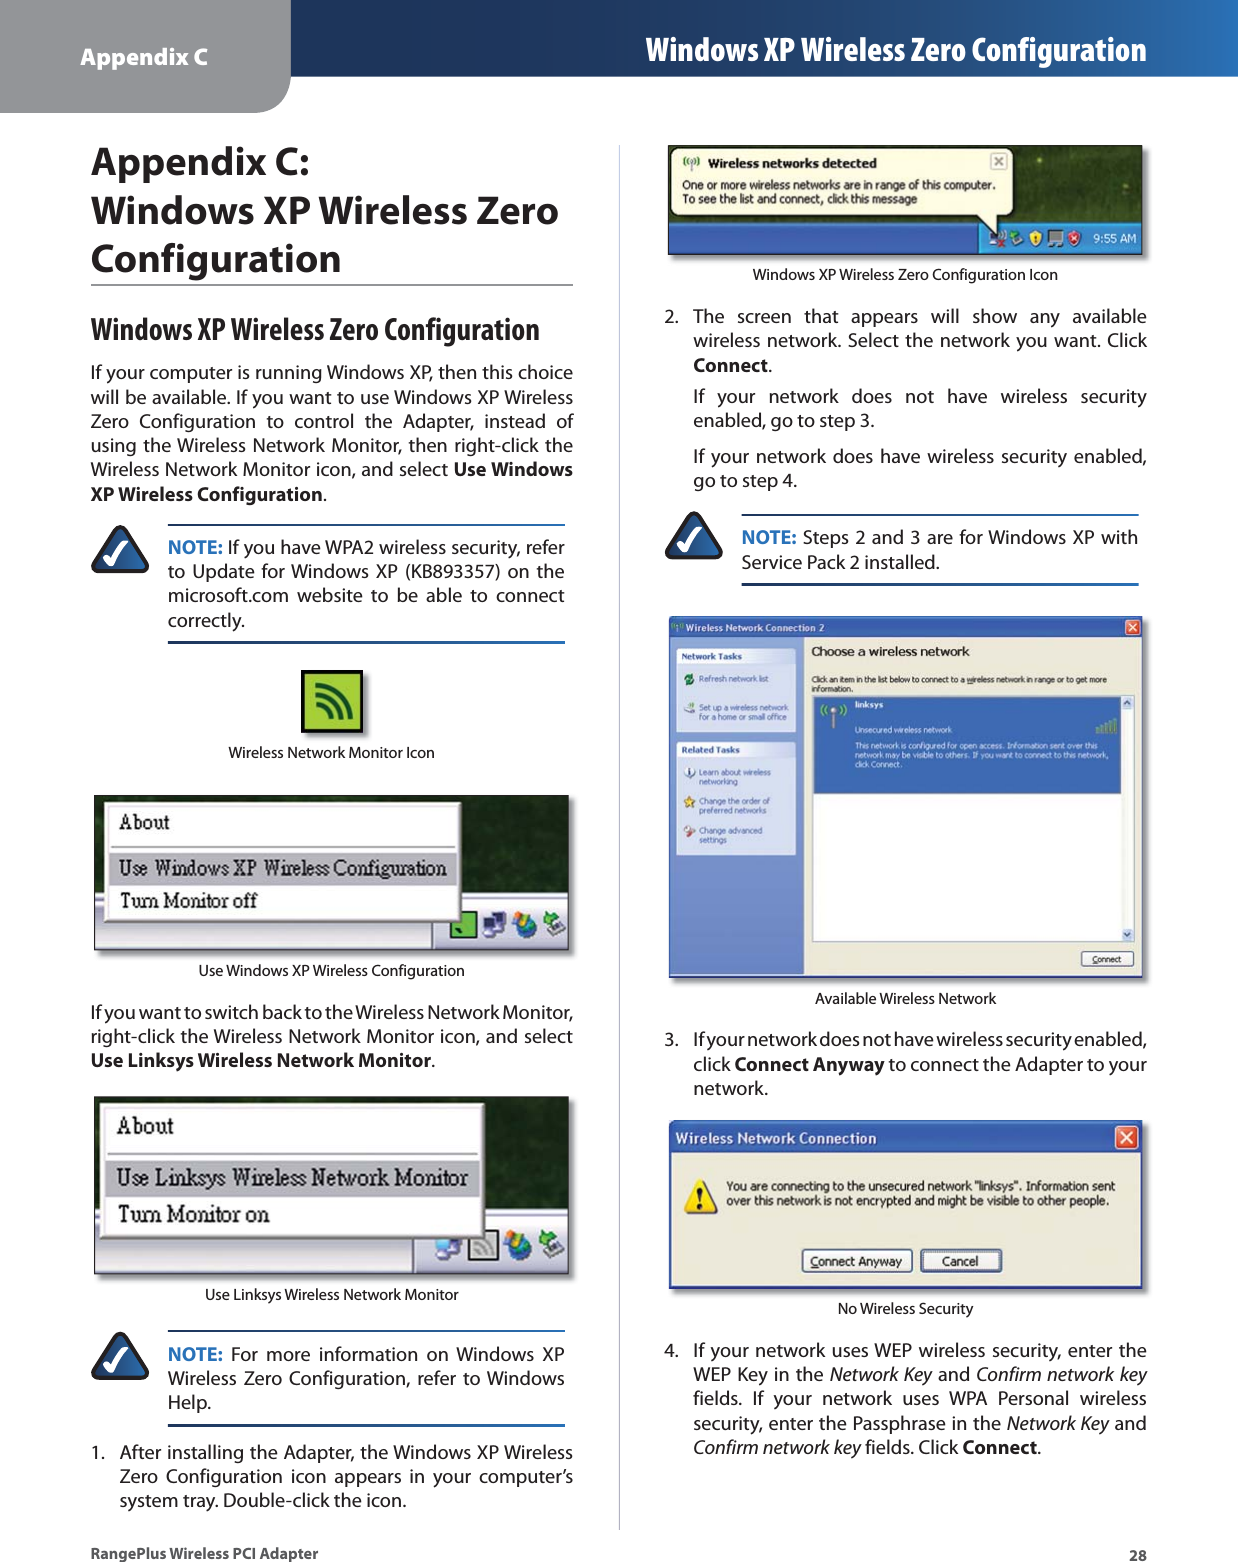 Appendix C Windows XP Wireless Zero Configuration28RangePlus Wireless PCI AdapterAppendix C: Windows XP Wireless Zero ConfigurationWindows XP Wireless Zero ConfigurationIf your computer is running Windows XP, then this choice will be available. If you want to use Windows XP Wireless Zero Configuration to control the Adapter, instead of using the Wireless Network Monitor, then right-click the Wireless Network Monitor icon, and select Use Windows XP Wireless Configuration.NOTE: If you have WPA2 wireless security, refer to Update for Windows XP (KB893357) on the microsoft.com website to be able to connect correctly.Wireless Network Monitor IconUse Windows XP Wireless ConfigurationIf you want to switch back to the Wireless Network Monitor, right-click the Wireless Network Monitor icon, and select Use Linksys Wireless Network Monitor.Use Linksys Wireless Network MonitorNOTE: For more information on Windows XP Wireless Zero Configuration, refer to Windows Help.After installing the Adapter, the Windows XP Wireless Zero Configuration icon appears in your computer’s system tray. Double-click the icon.1.Windows XP Wireless Zero Configuration IconThe screen that appears will show any available wireless network. Select the network you want. Click Connect.If your network does not have wireless security enabled, go to step 3.If your network does have wireless security enabled, go to step 4.NOTE: Steps 2 and 3 are for Windows XP with Service Pack 2 installed.Available Wireless NetworkIf your network does not have wireless security enabled, click Connect Anyway to connect the Adapter to your network.No Wireless SecurityIf your network uses WEP wireless security, enter the WEP Key in the Network Key and Confirm network keyfields. If your network uses WPA Personal wireless security, enter the Passphrase in the Network Key and Confirm network key fields. Click Connect.2.3.4.